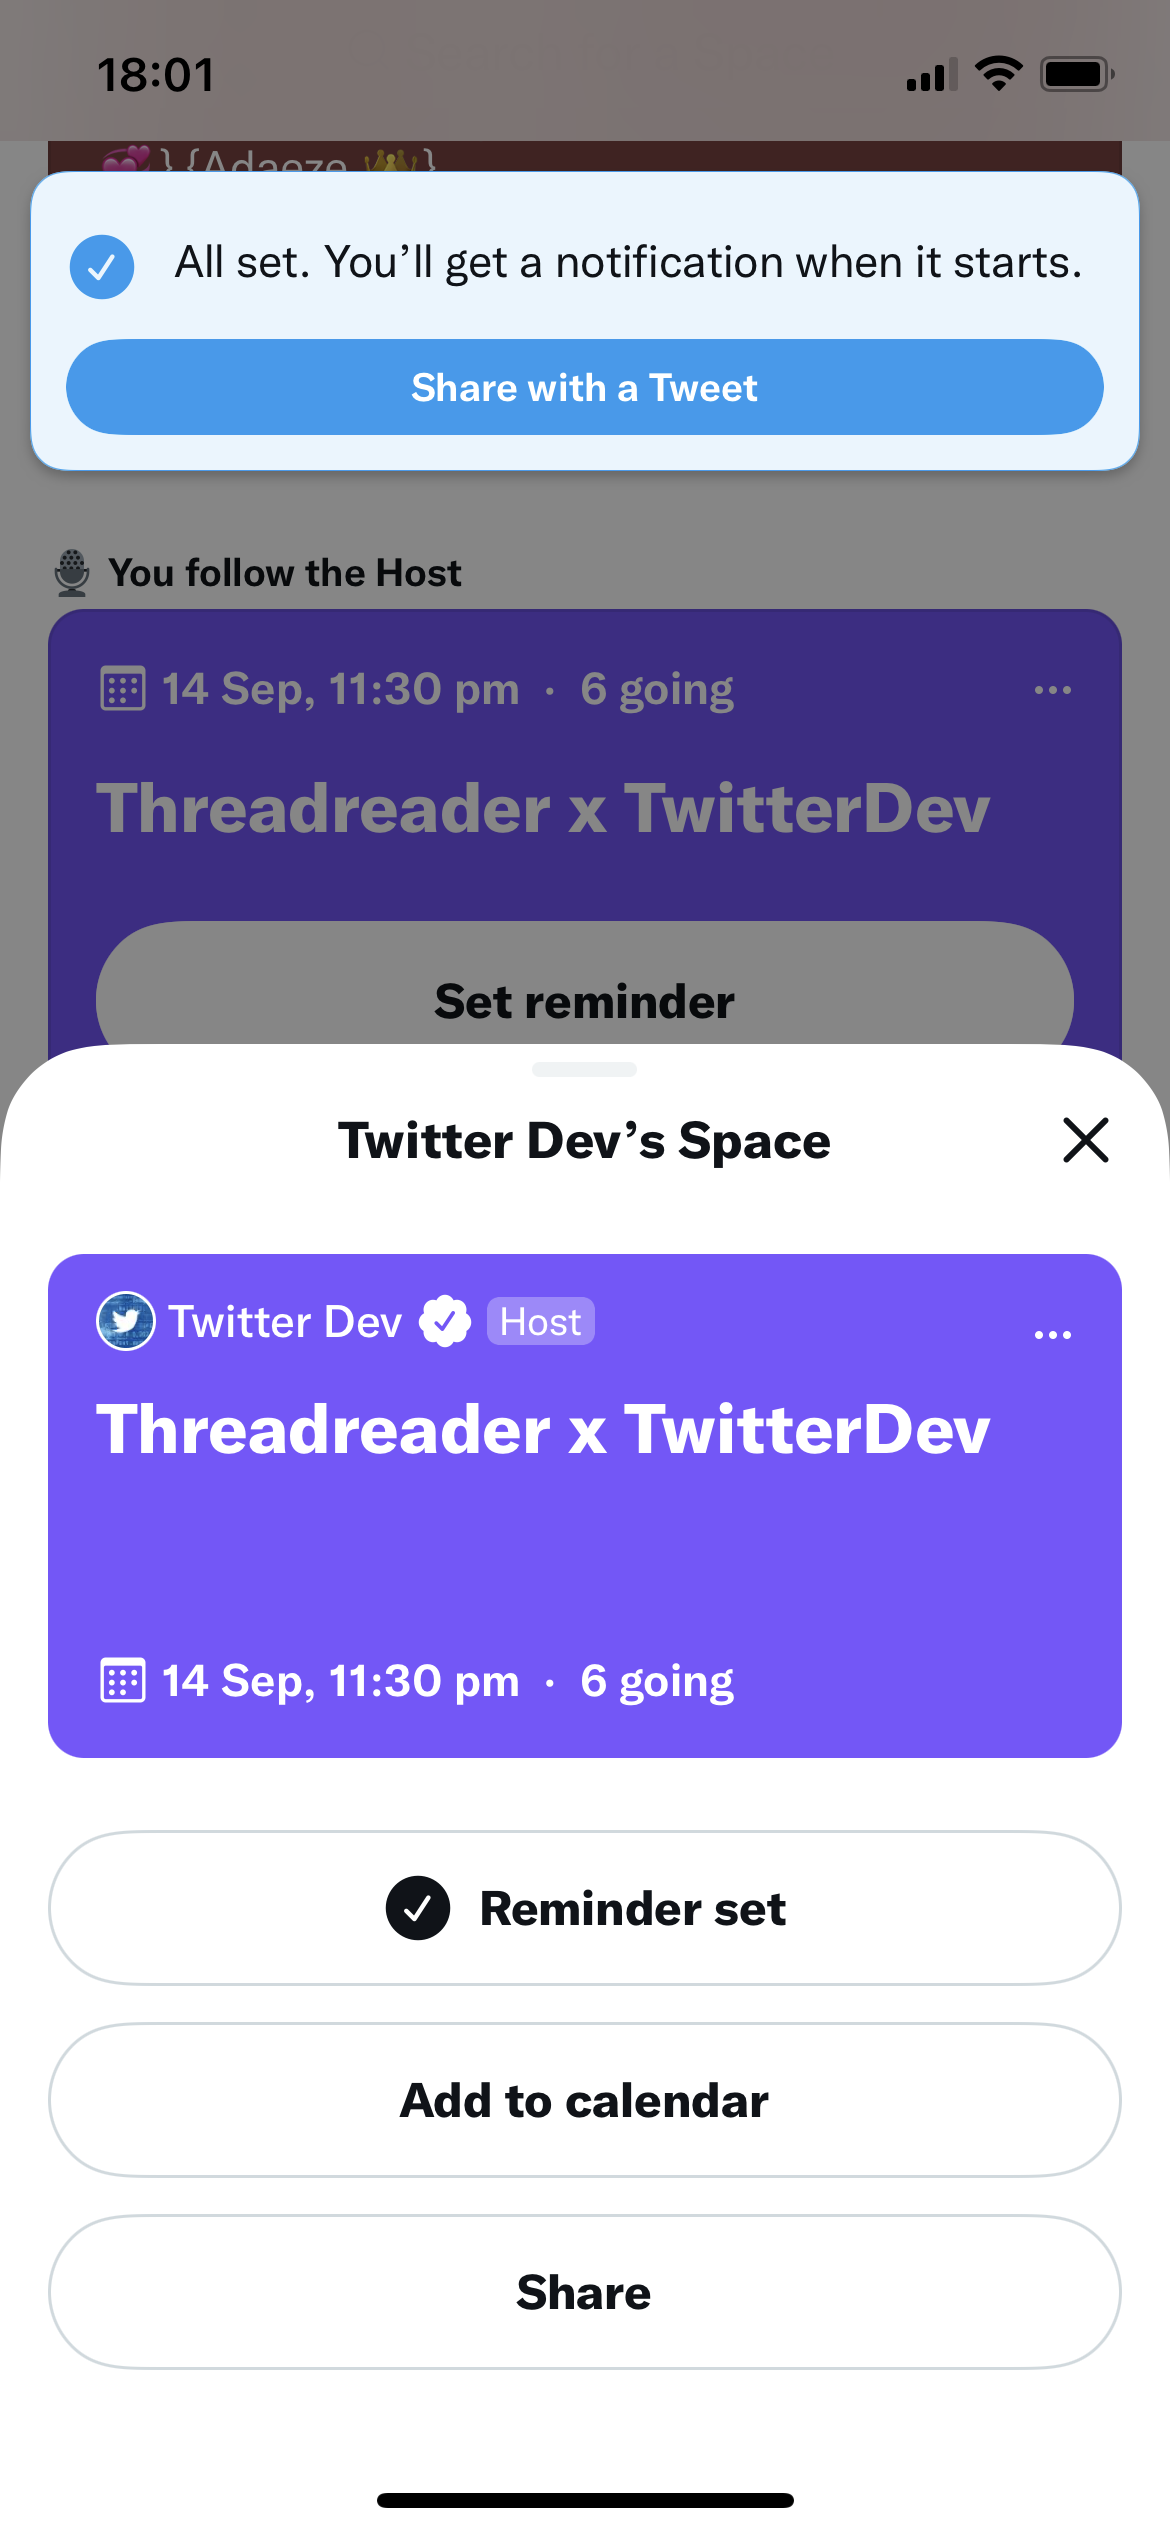 How to create a calendar reminder for a Twitter Space